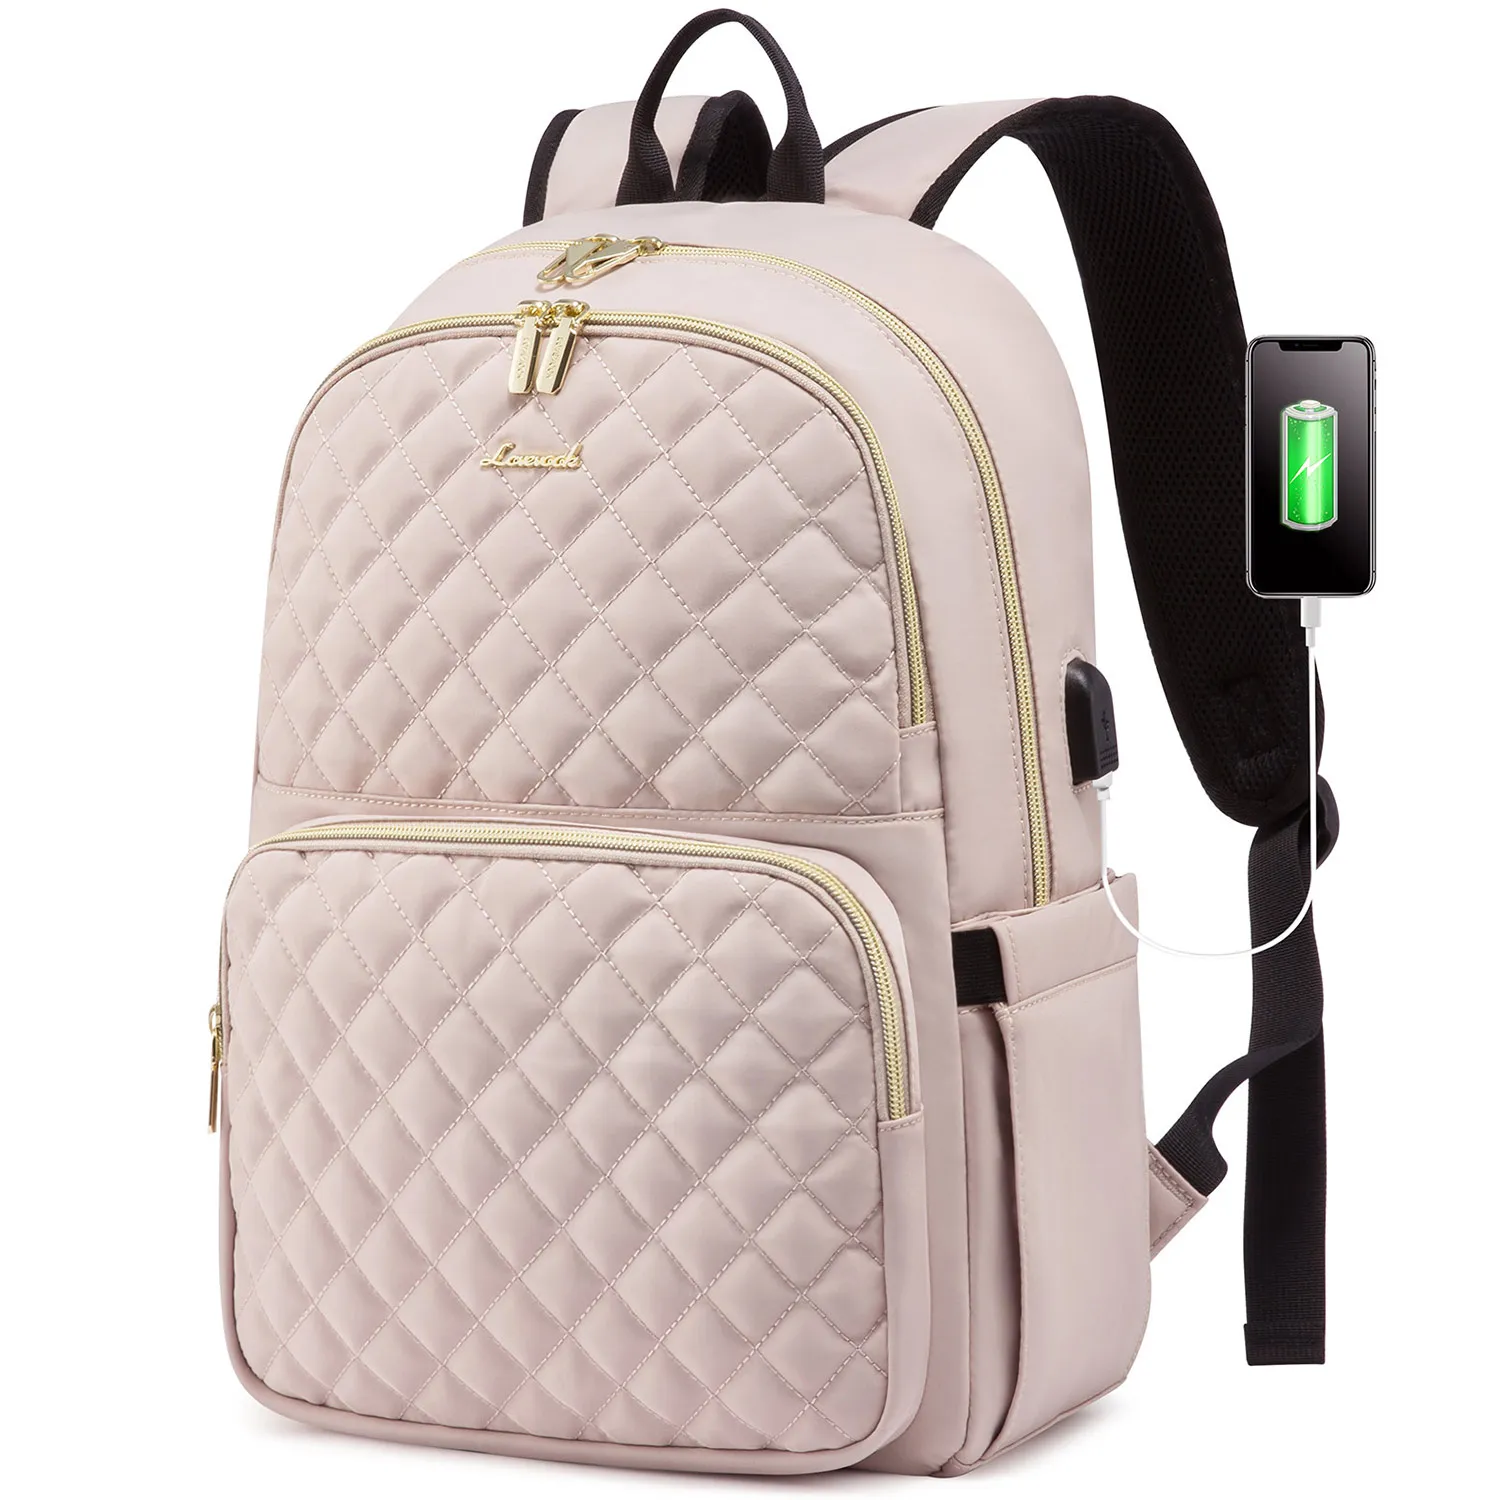 

LOVEVOOK new Quilted Travel bags fashion 15.6 17inch Computer College geometric School Bookbag Anti-Theft USB laptop backpacks